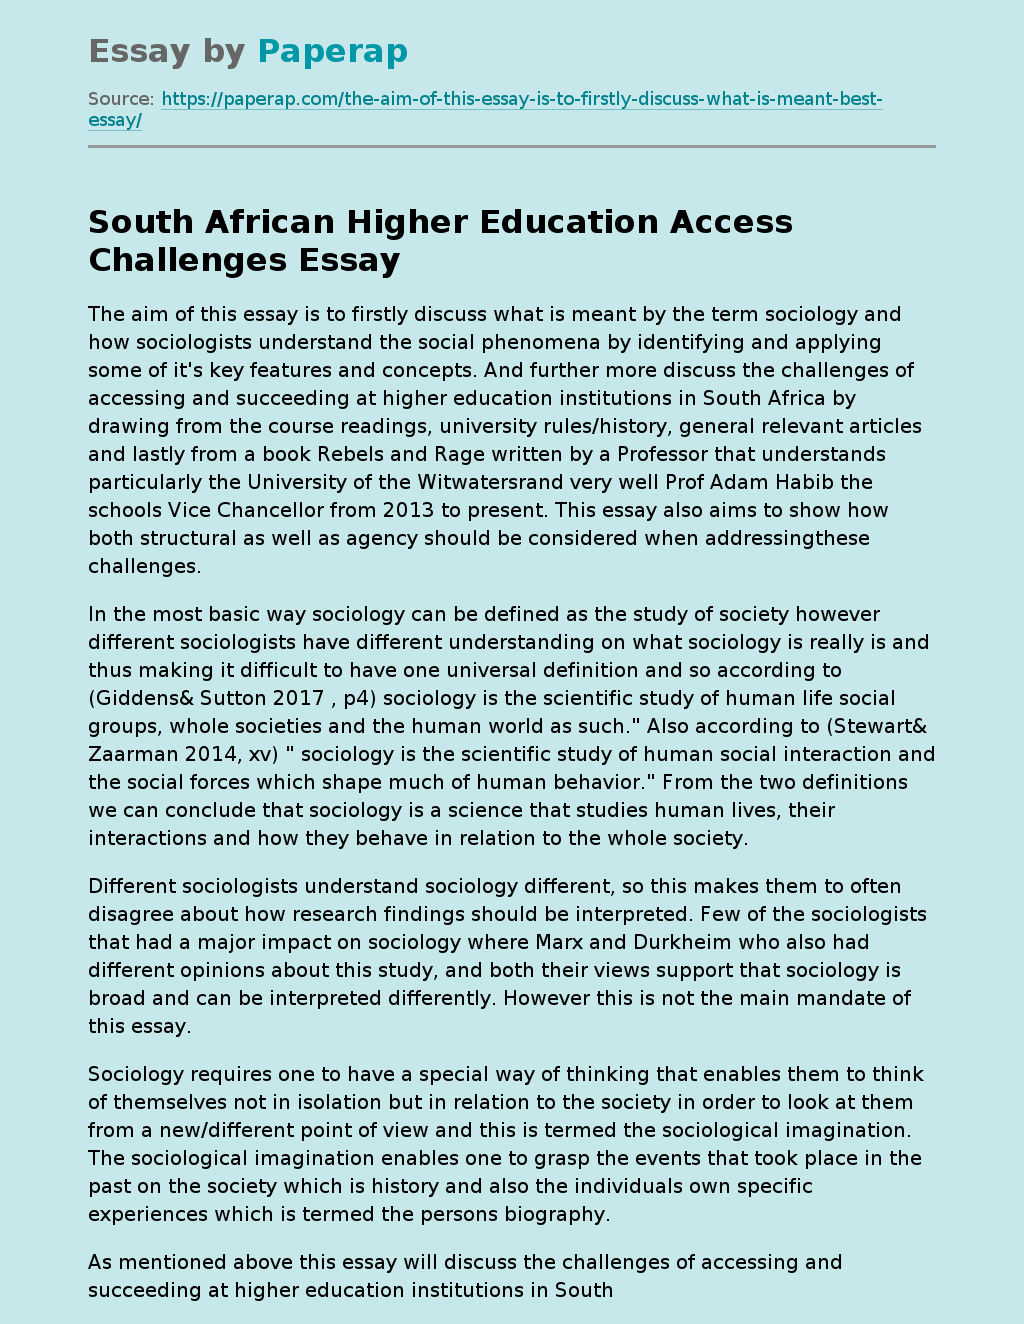 South African Higher Education Access Challenges